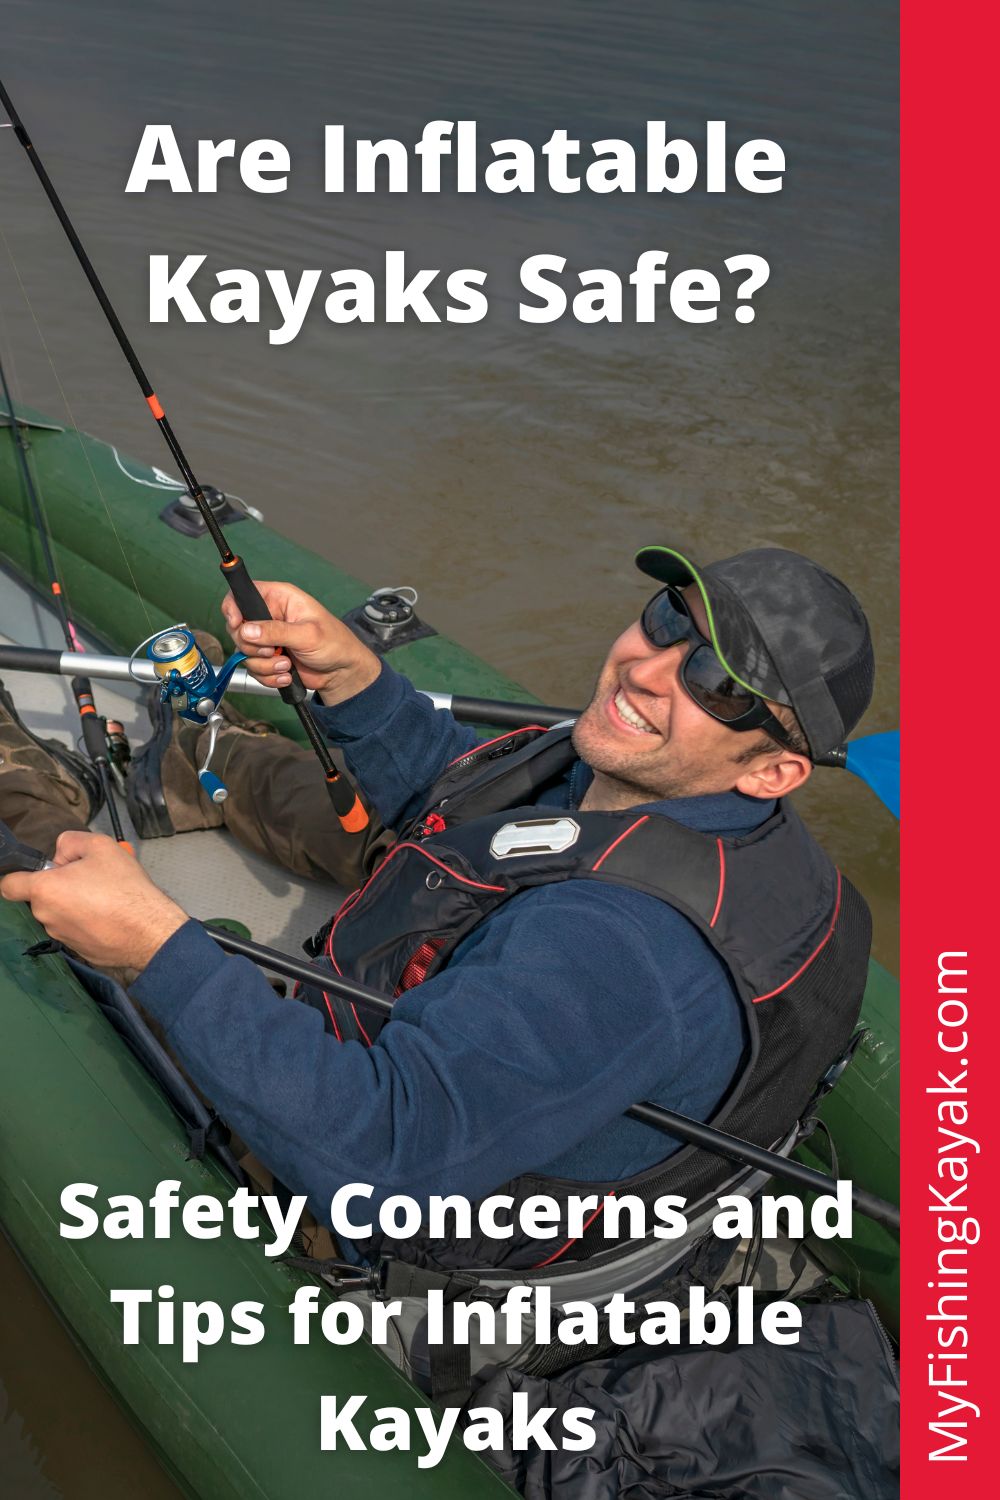 Safety Concerns and Tips for Inflatable Kayaks